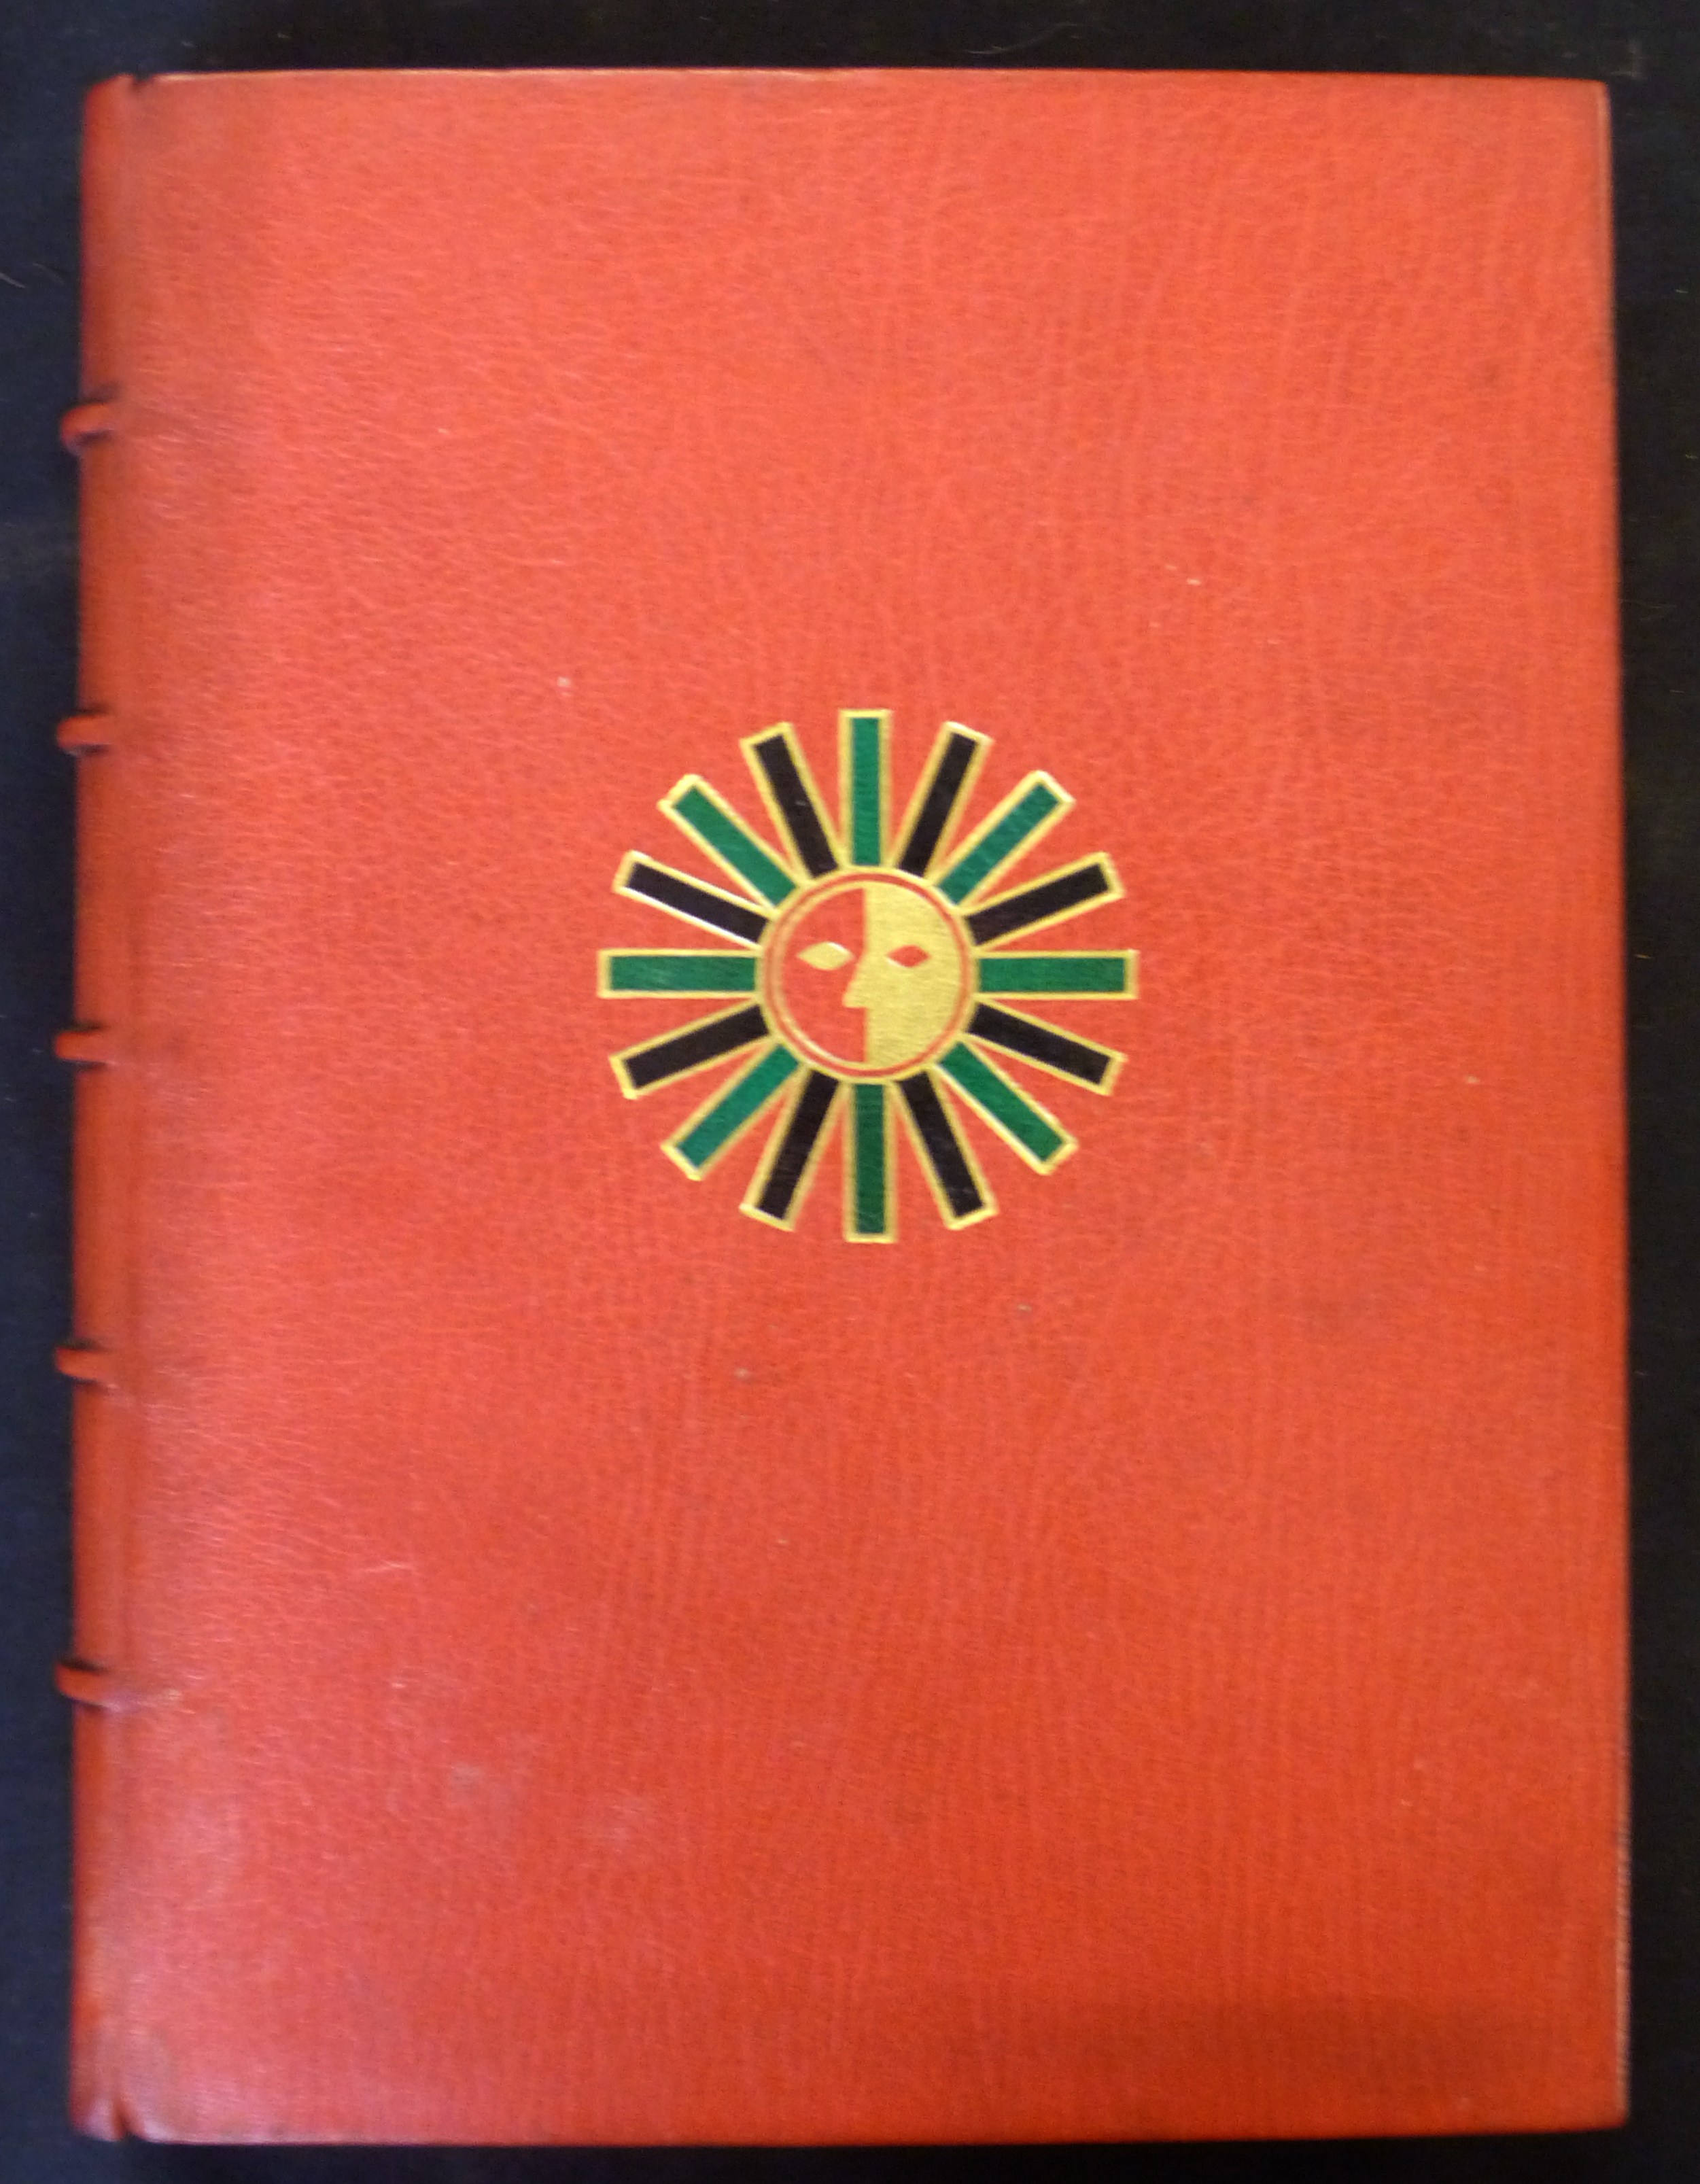 NANCY MITFORD: THE SUN KING, London, The Arcadia Press, 1969, (265) (250), numbered and signed, 4to, - Image 2 of 4